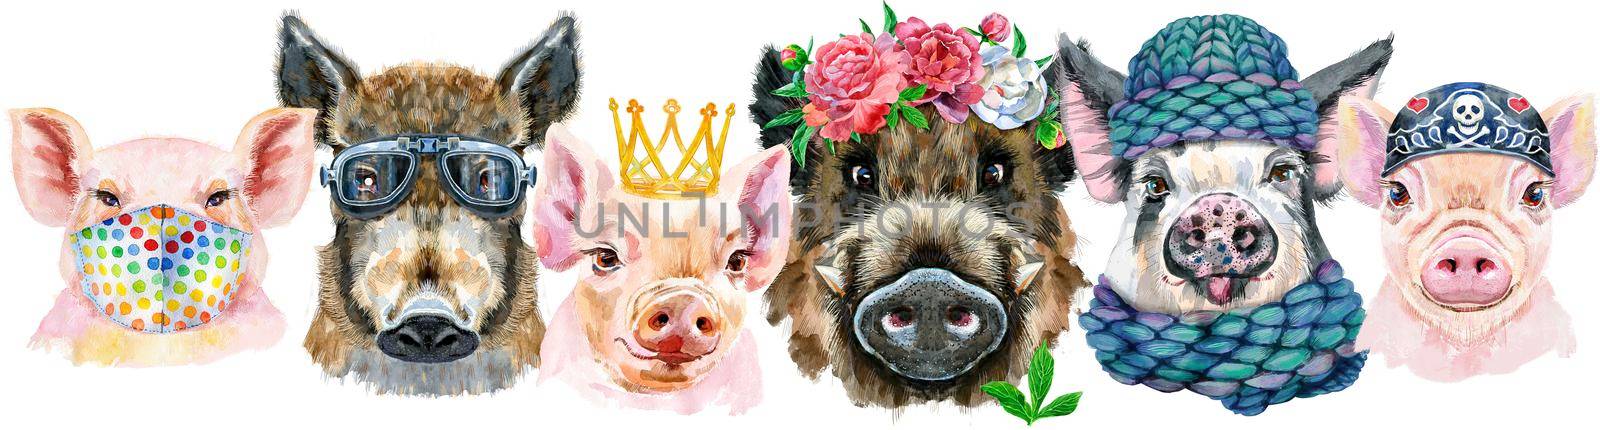 Cute border from watercolor portraits of pigs. Watercolor illustration of pigs in wreath of peonies, winter hat, medical protective mask, glasses, bandana and golden crown